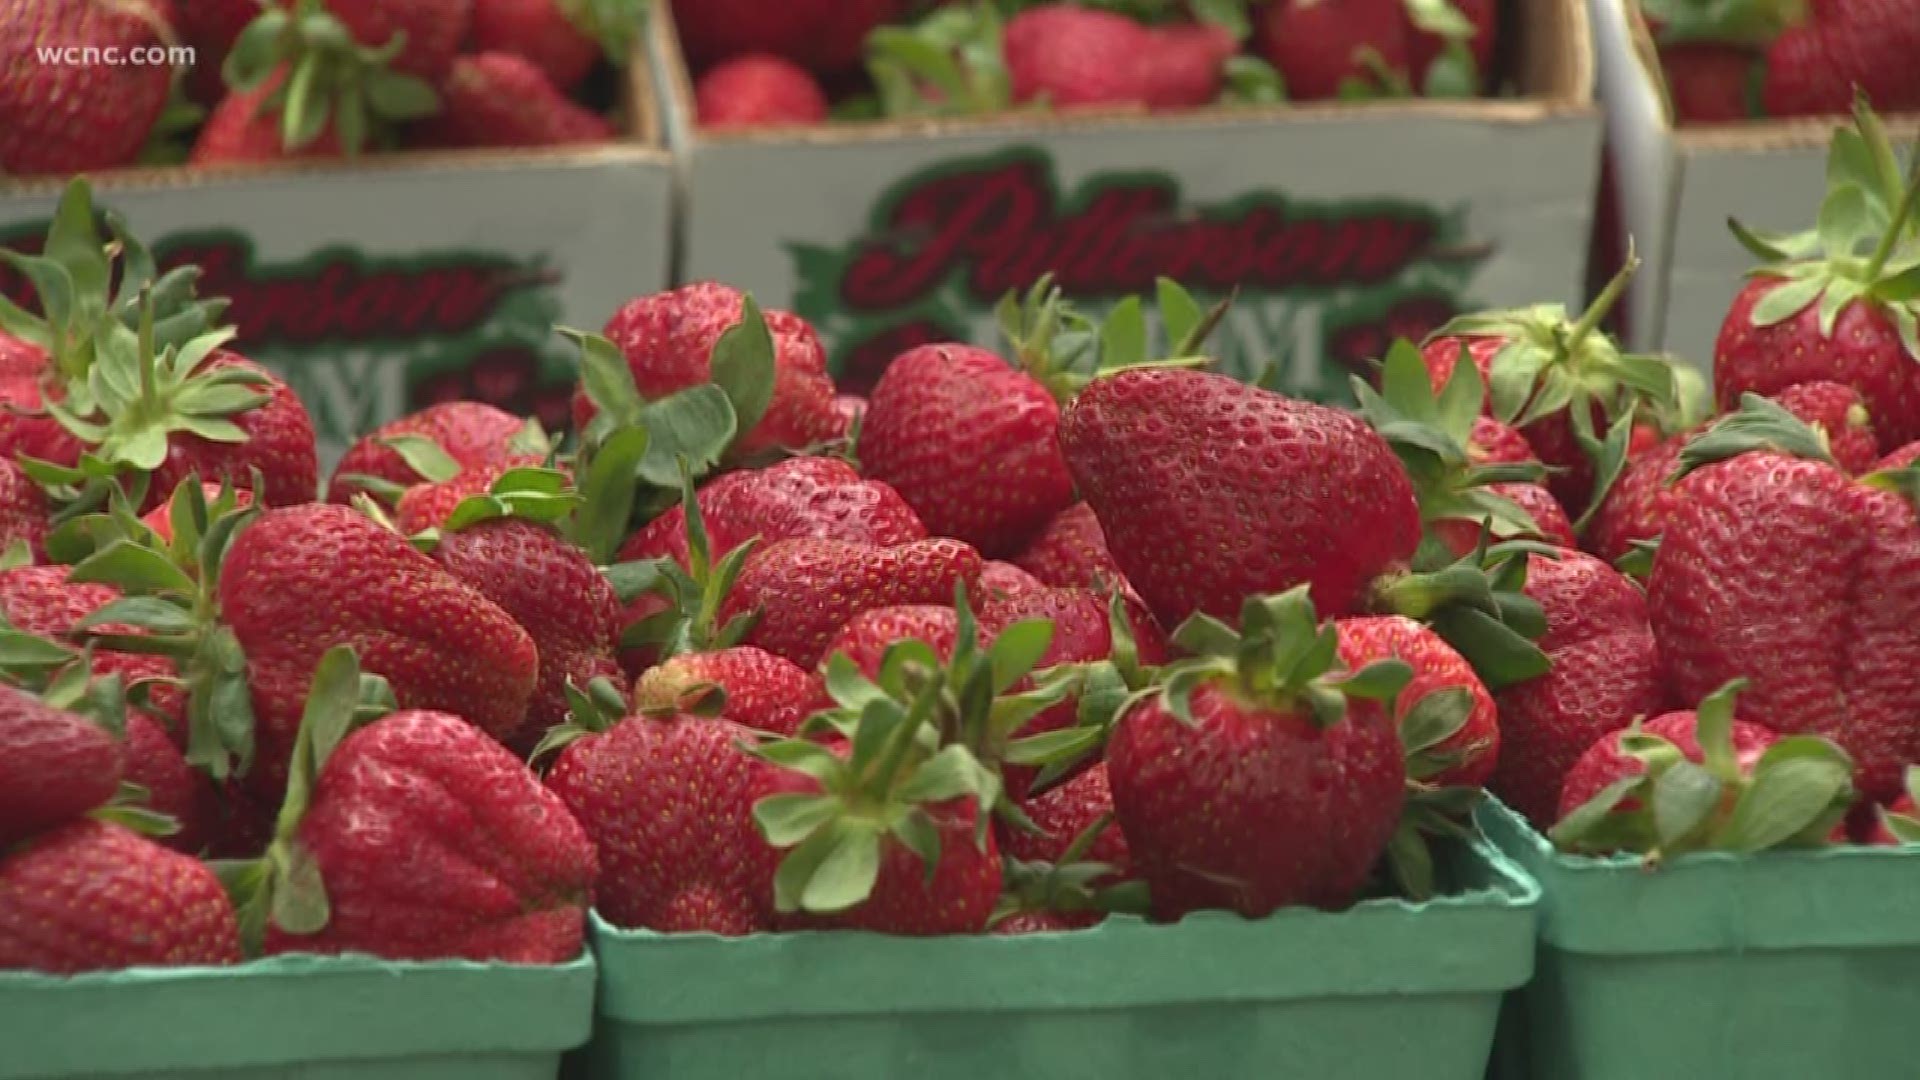 It’s strawberry season and Jason Stone from Unity Farms shares how you can get the freshest ones at local farms.